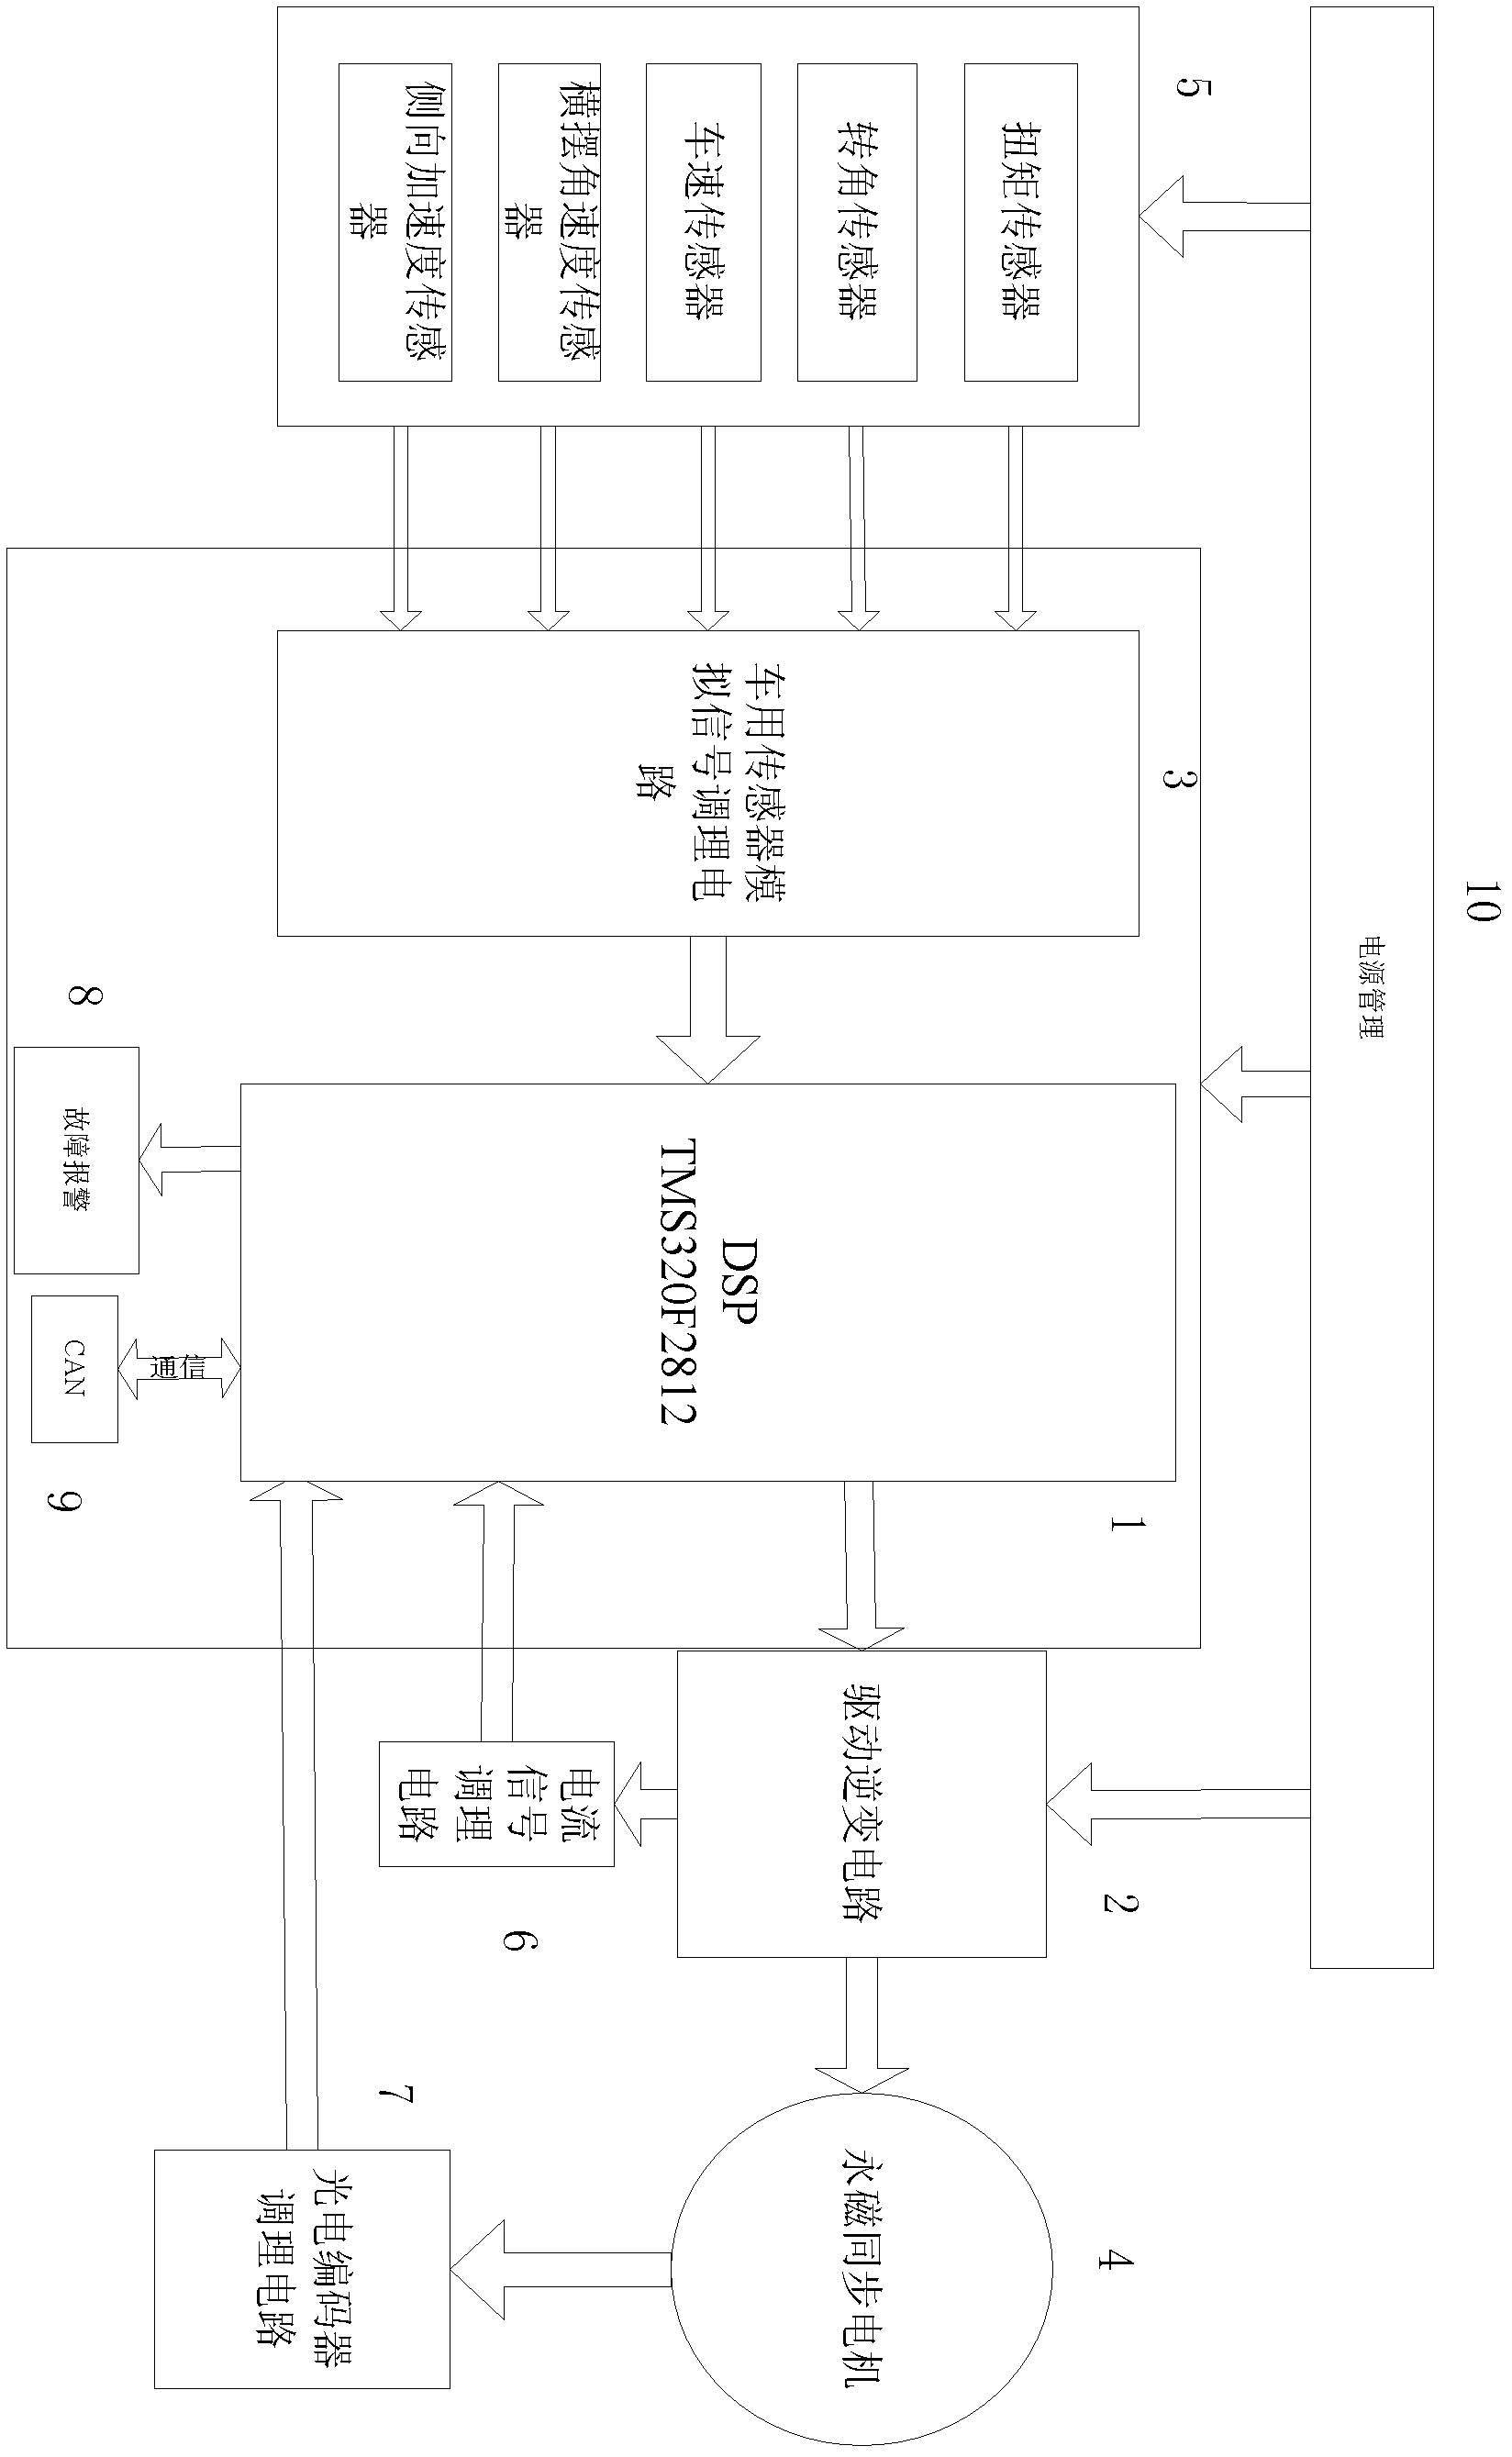 Alternating-current permanent magnet type electric power steering control system based on DSP (Digital Signal Processor) and method